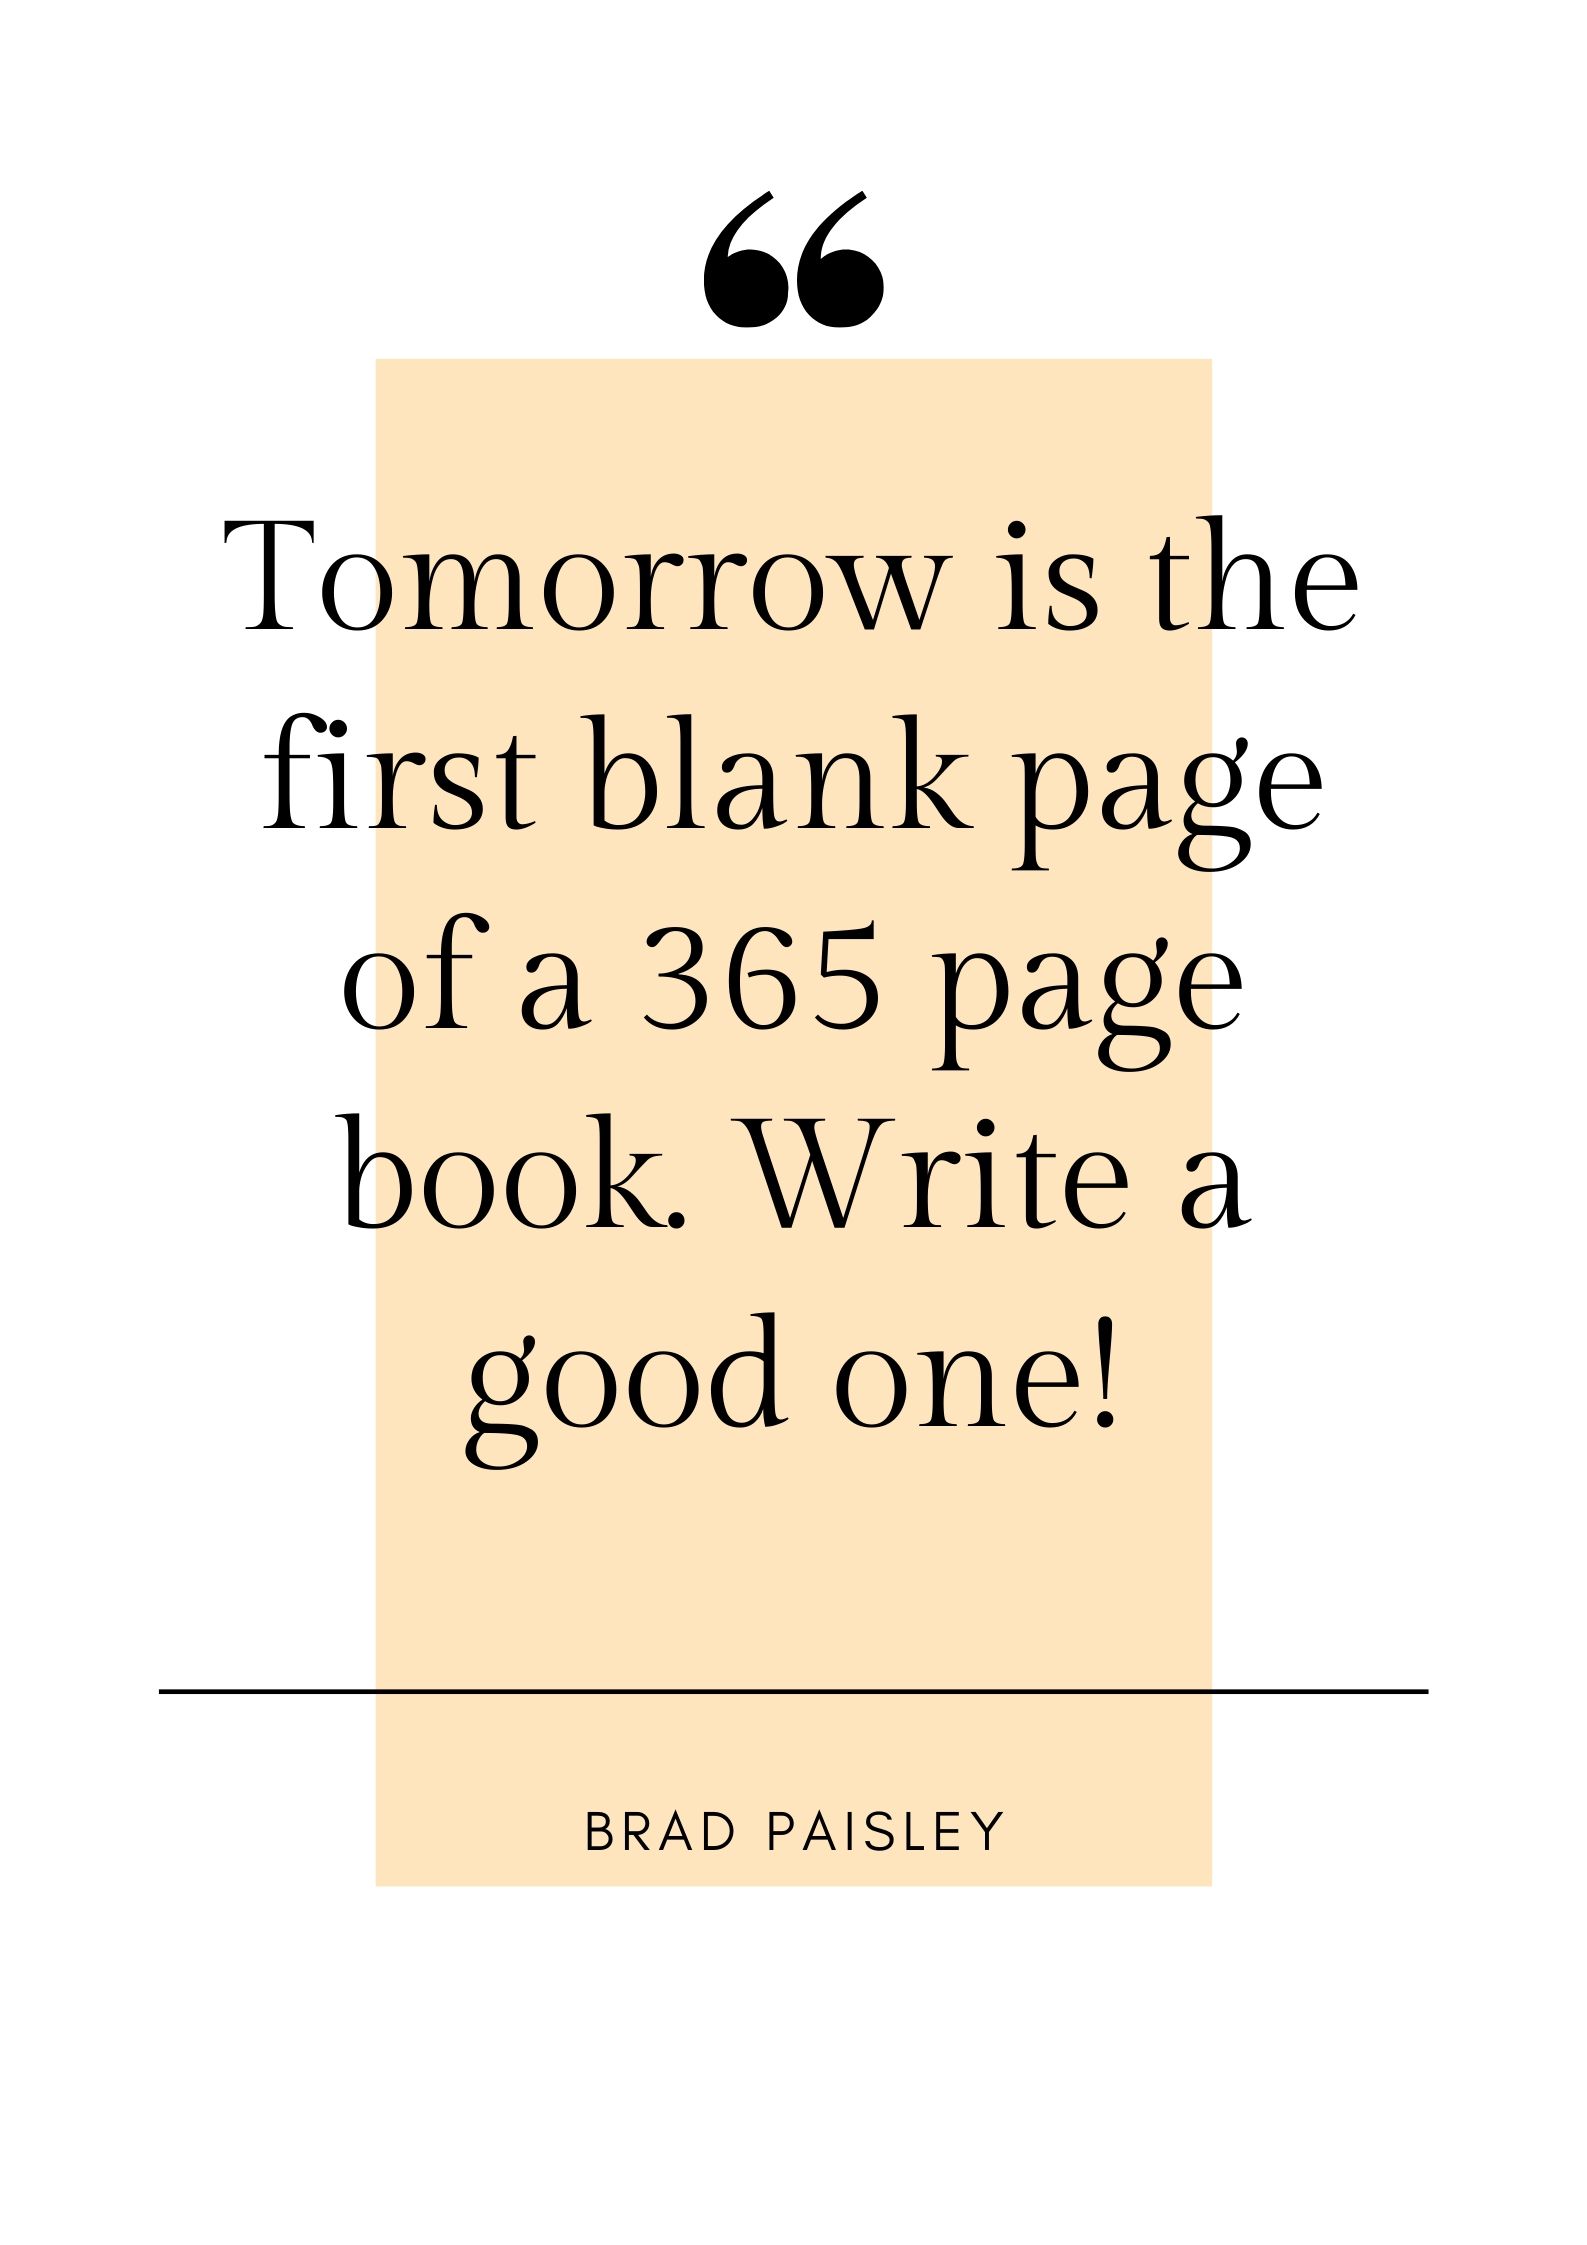 Tomorrow is the first blank page of a 365 page book. Write a good one!